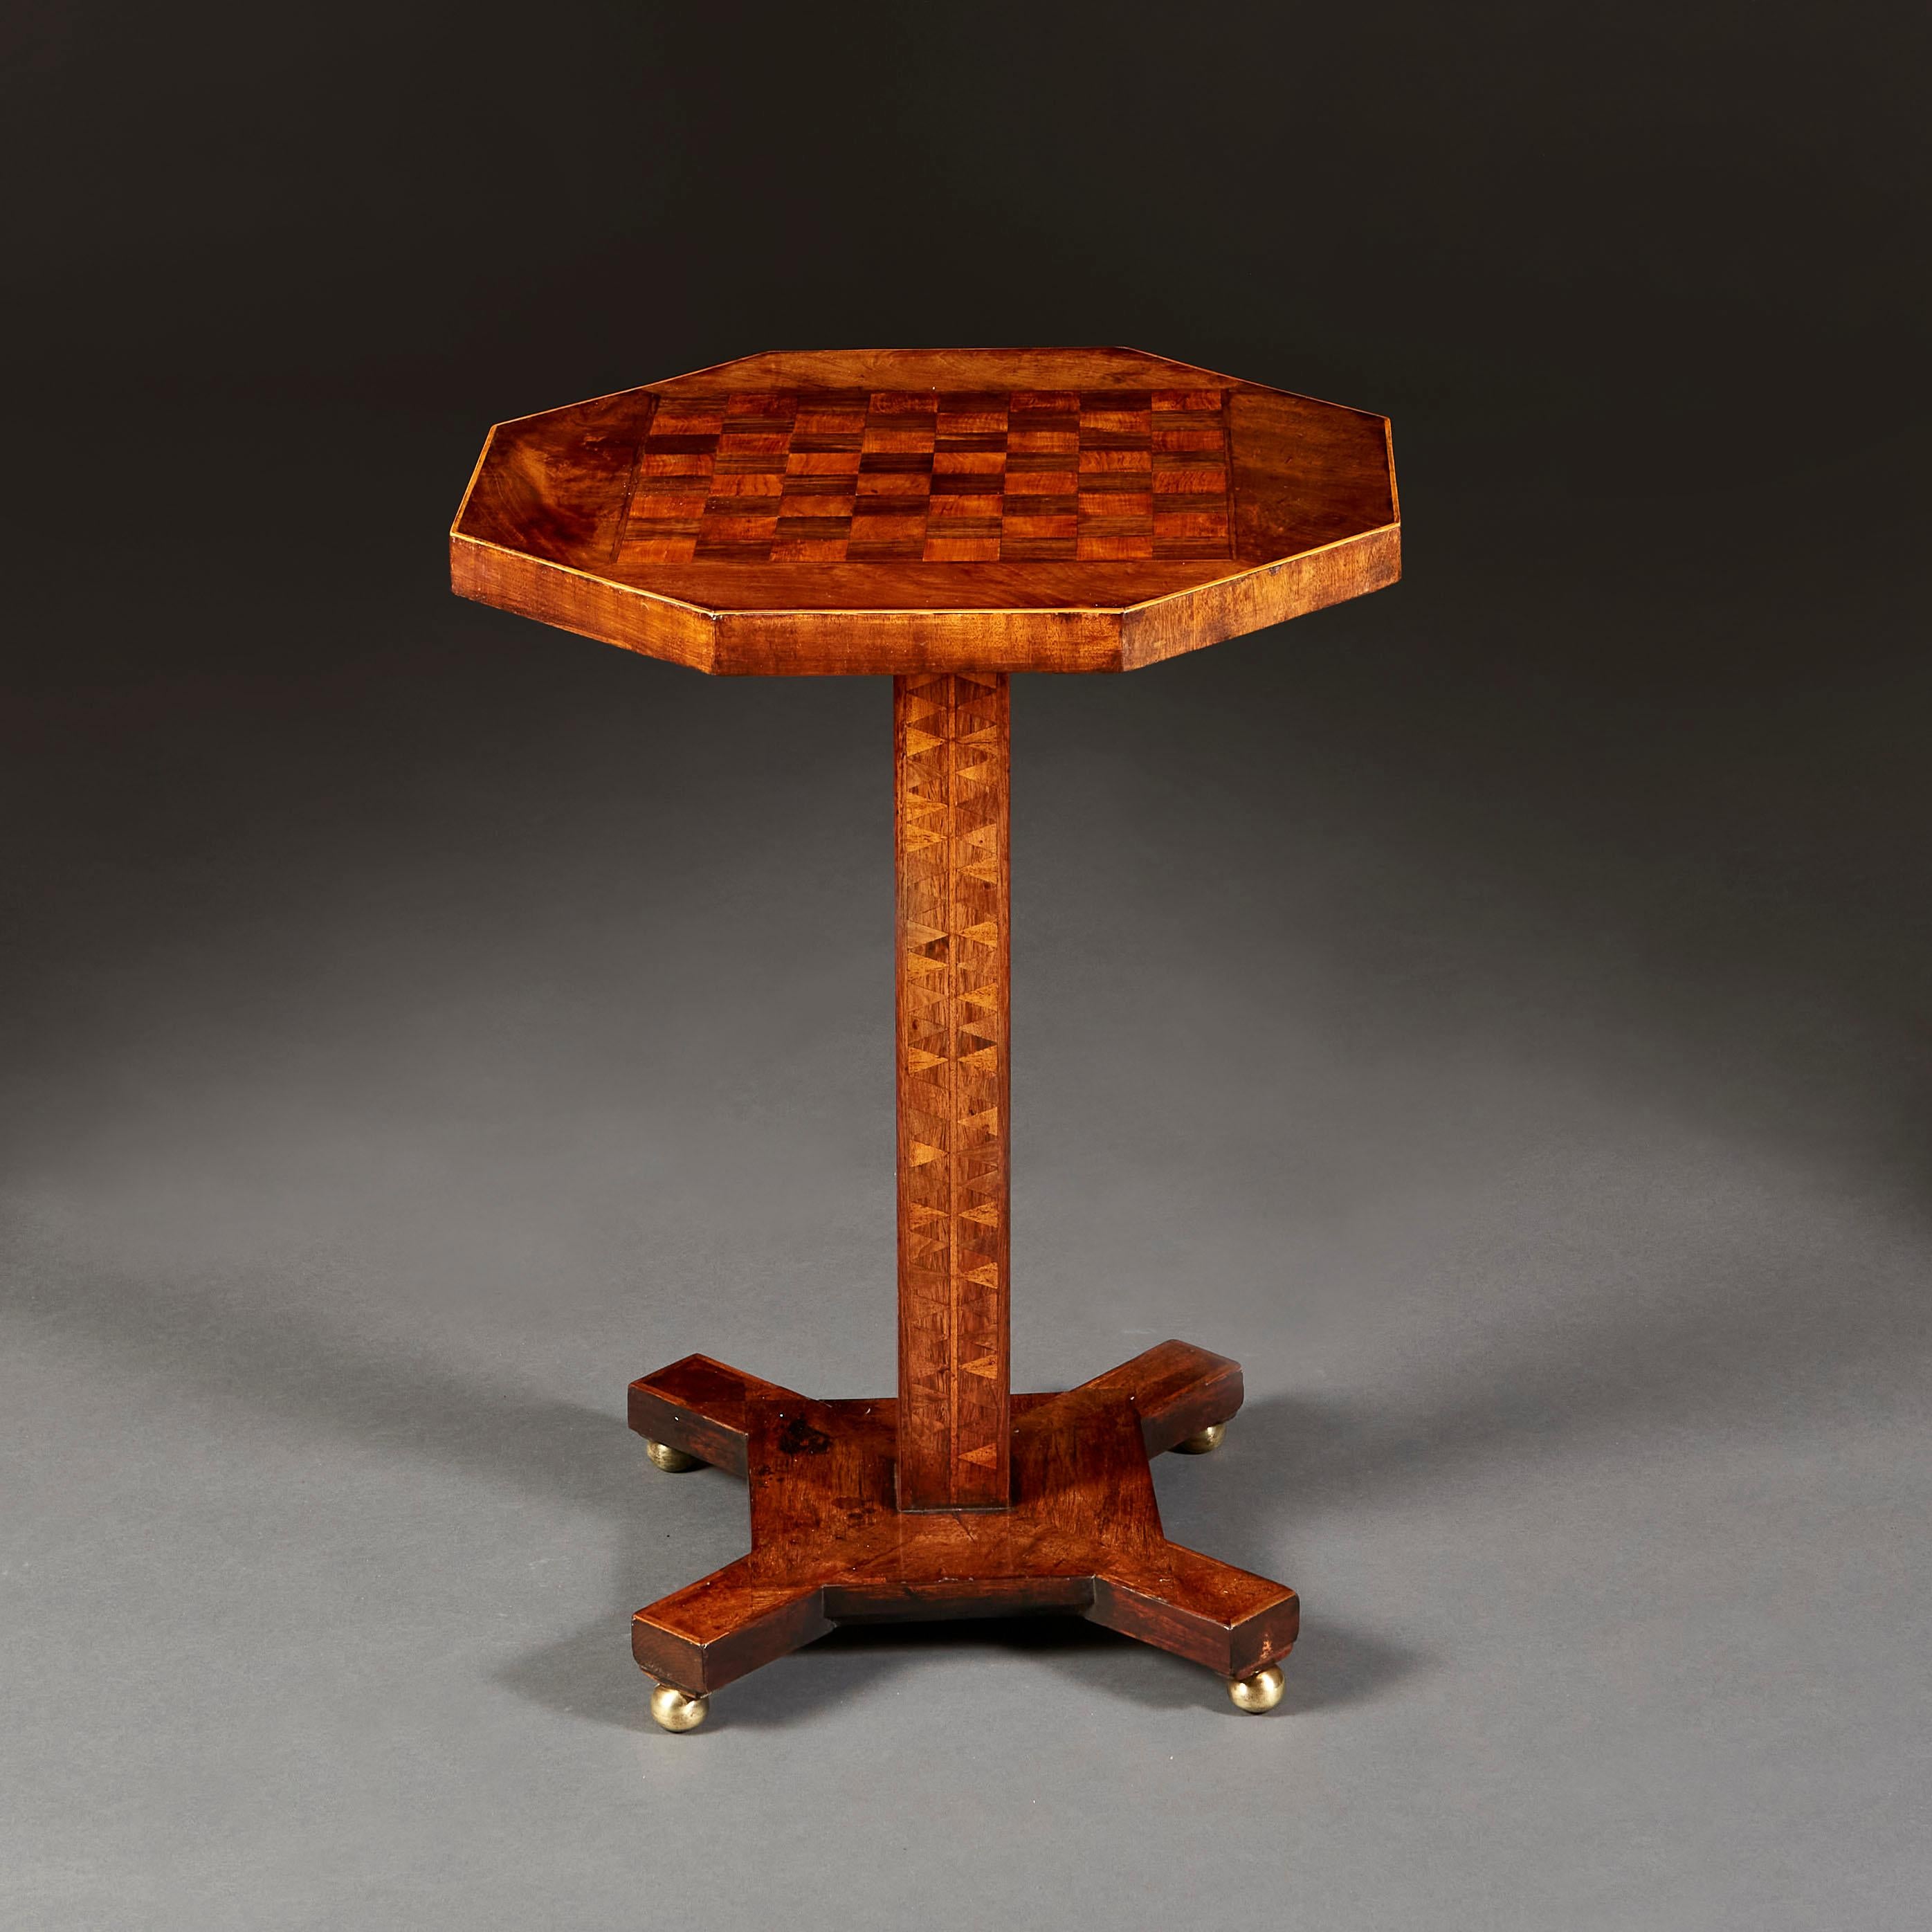 A fine Regency mahogany and fruitwood occasional table with octagonal top with inlaid chessboard, the pedestal with chevron marquetry throughout, all supported on a quadruped base with brass bun feet.